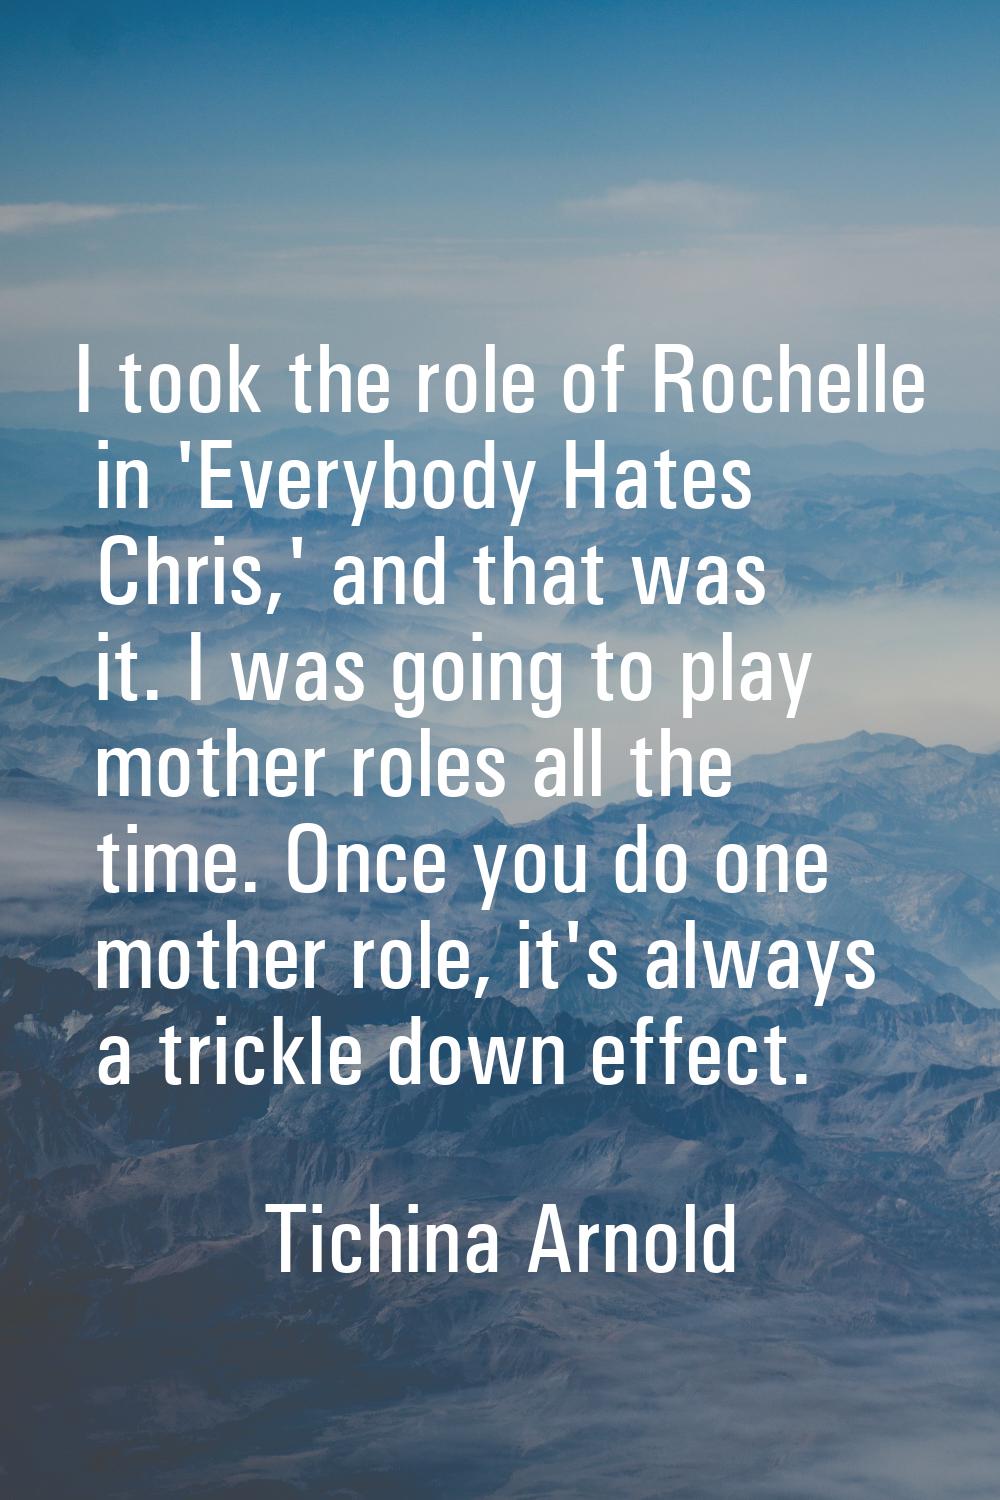 I took the role of Rochelle in 'Everybody Hates Chris,' and that was it. I was going to play mother